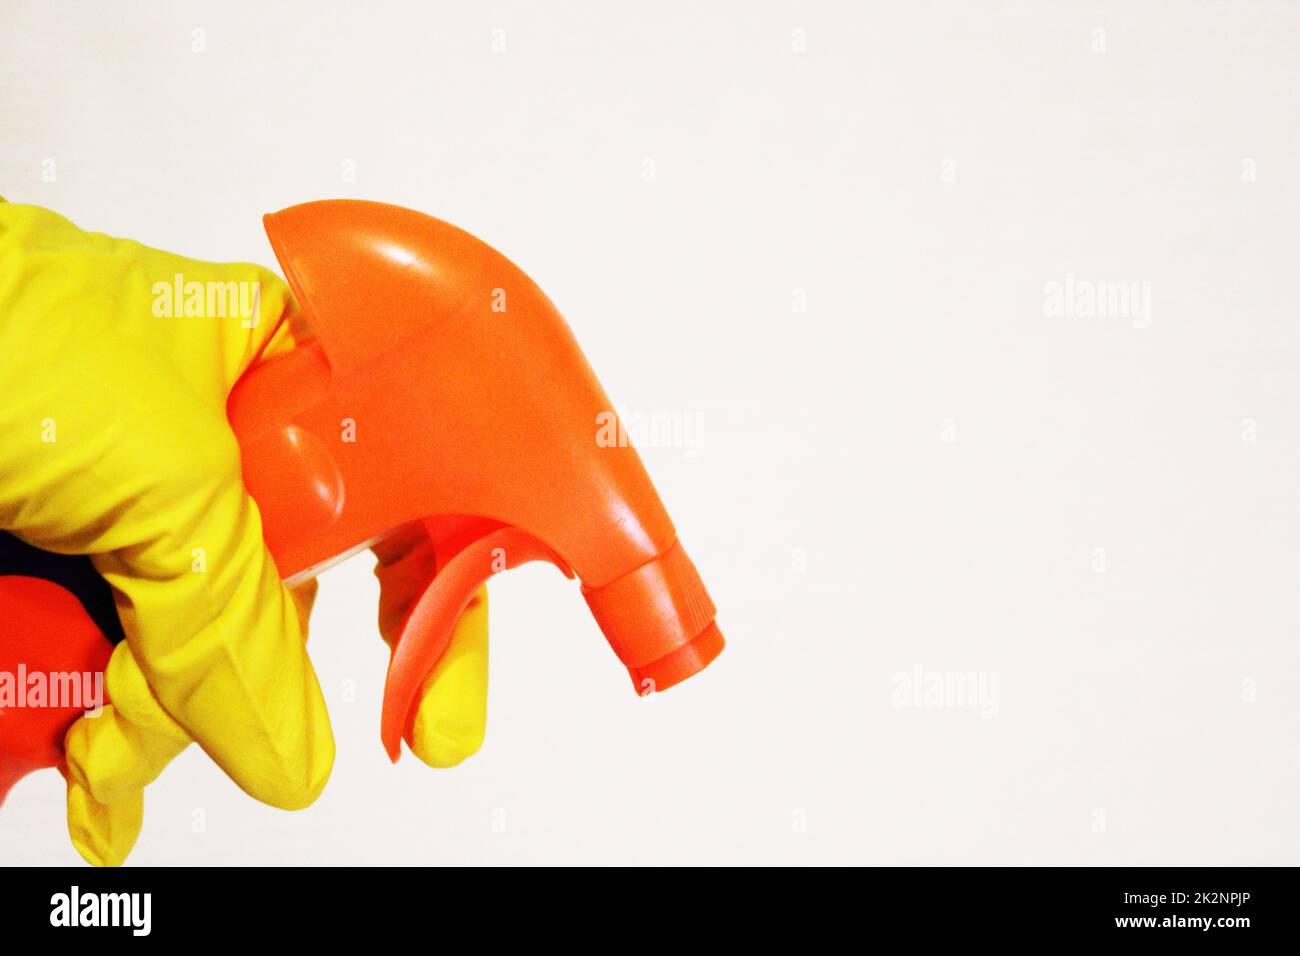 Image of a hand wearing a rubber glove with a cleaning spray. The concept of purity. Stock Photo